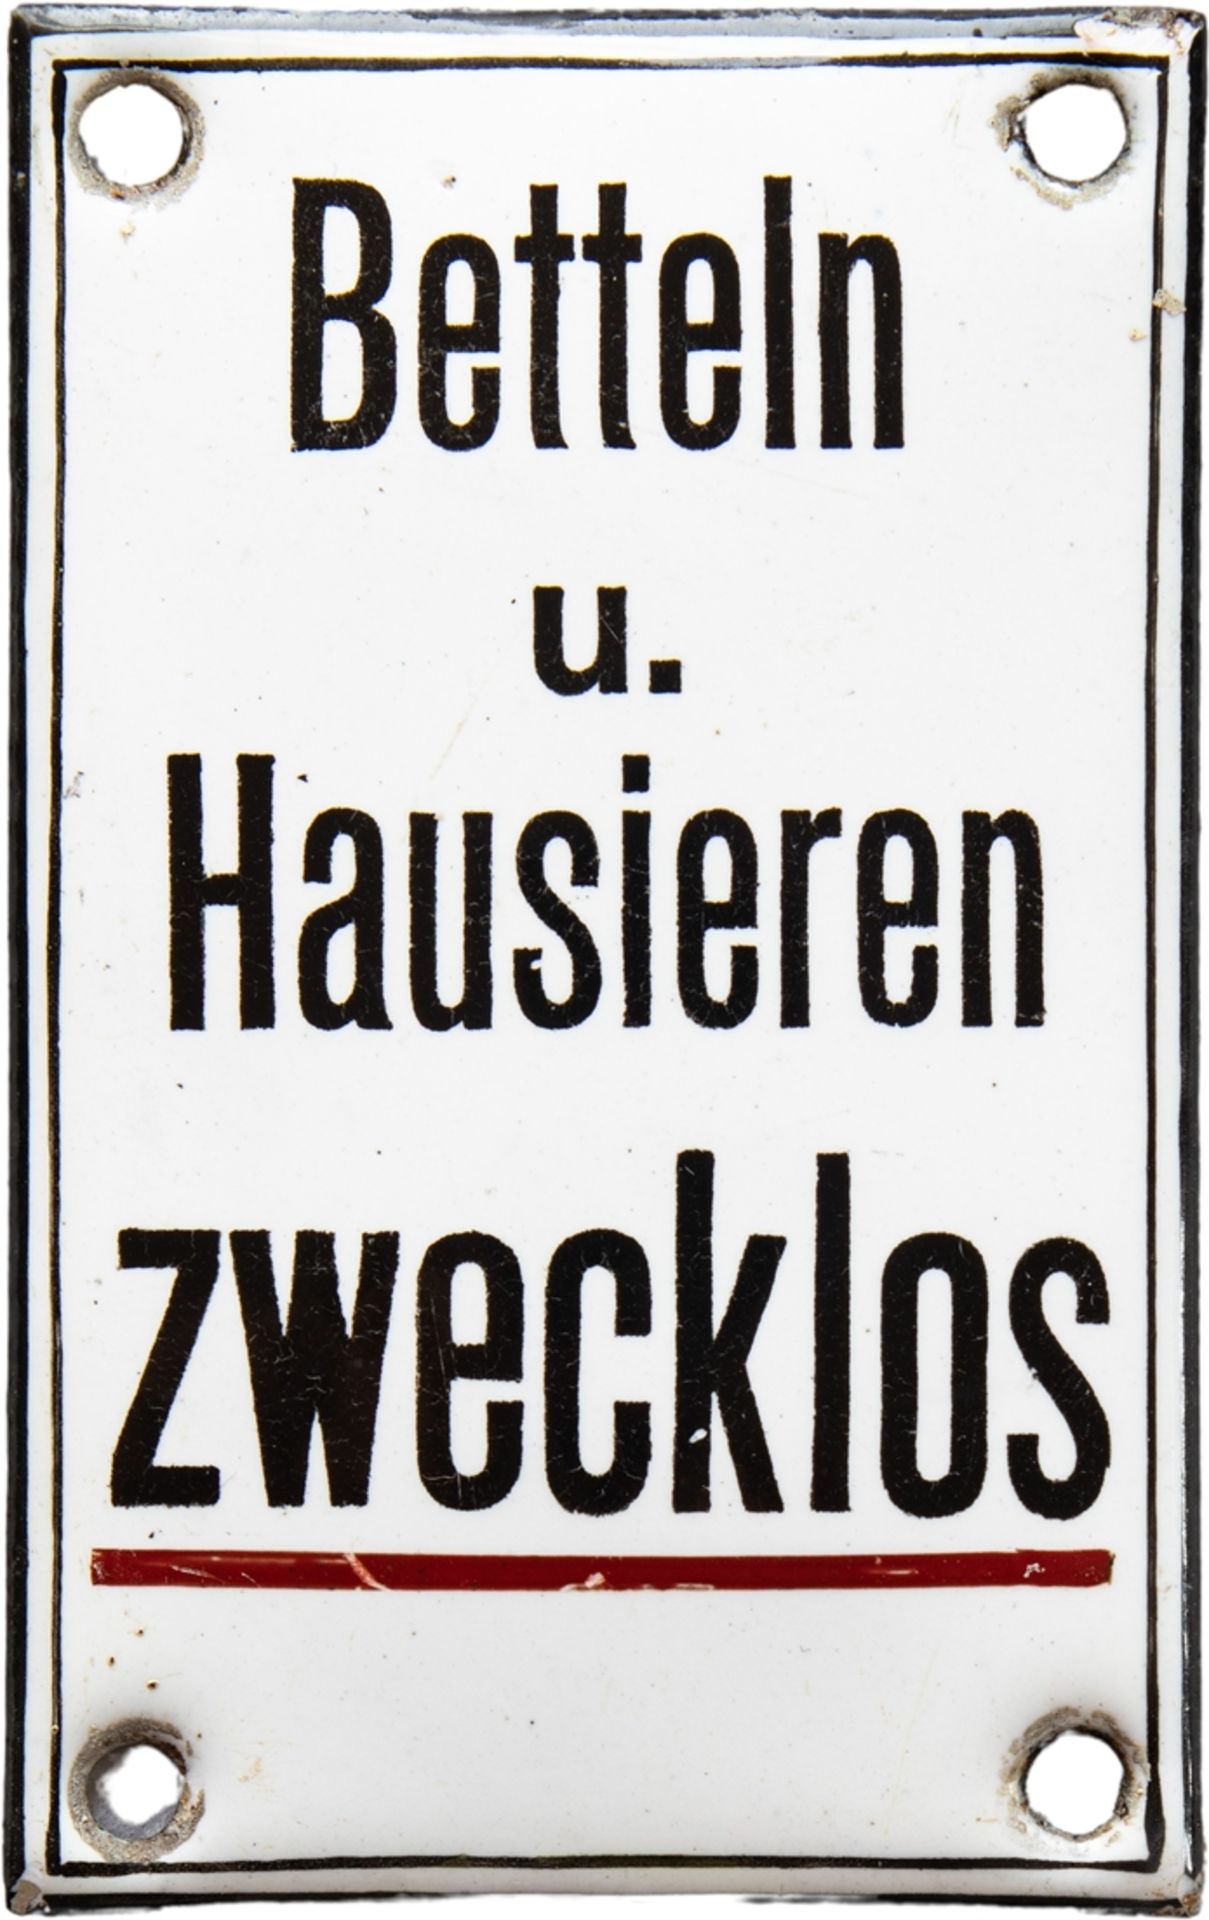 Enamel sign for begging and peddling, around 1920